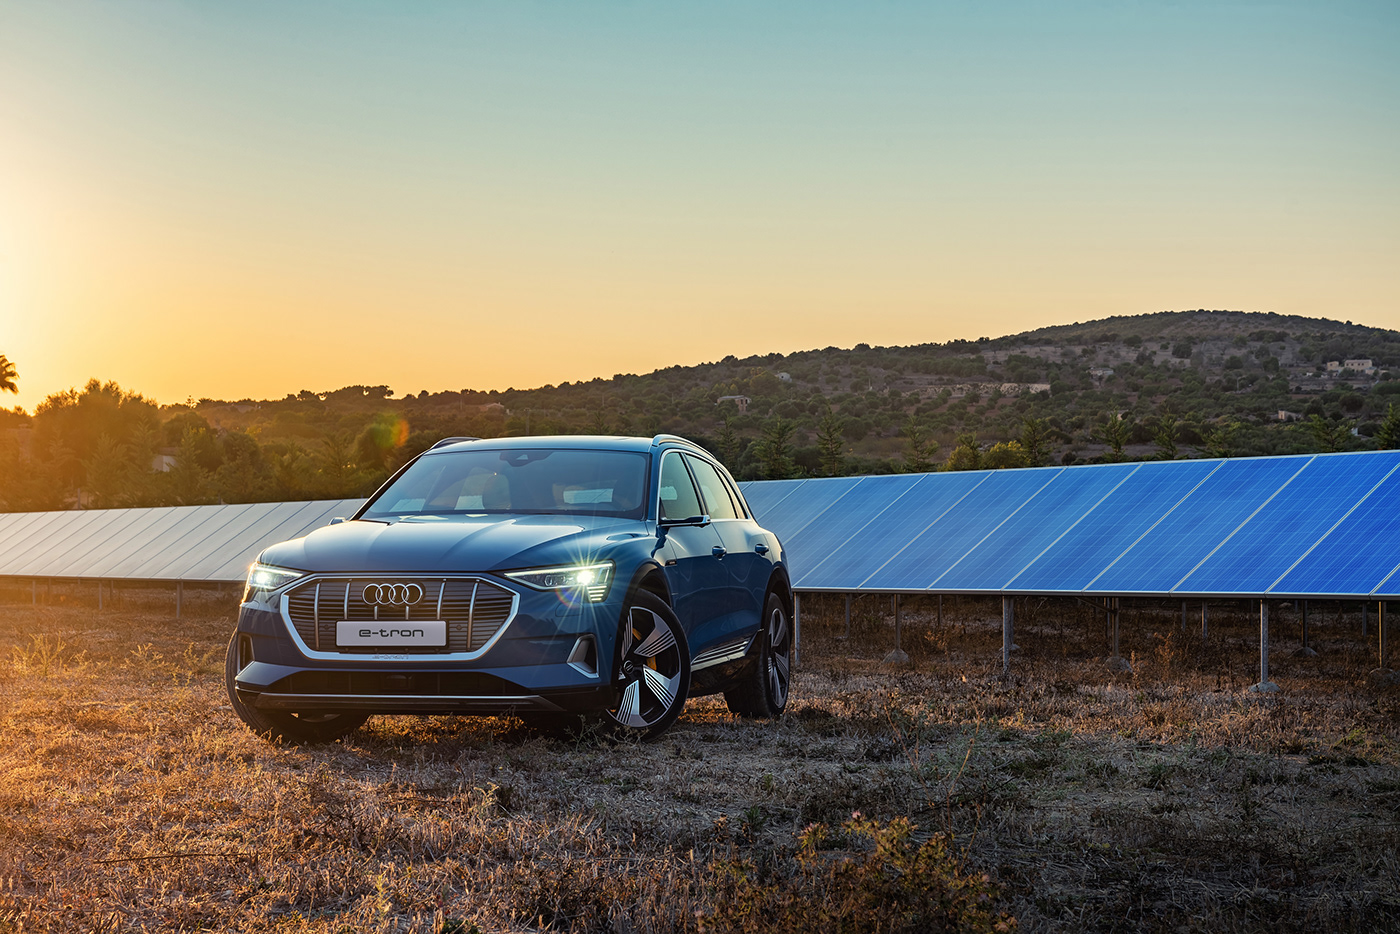 Audi e-tron sunset shot by Dean Wright Photography in Solar Farm. More on deanwrightautomotive.com